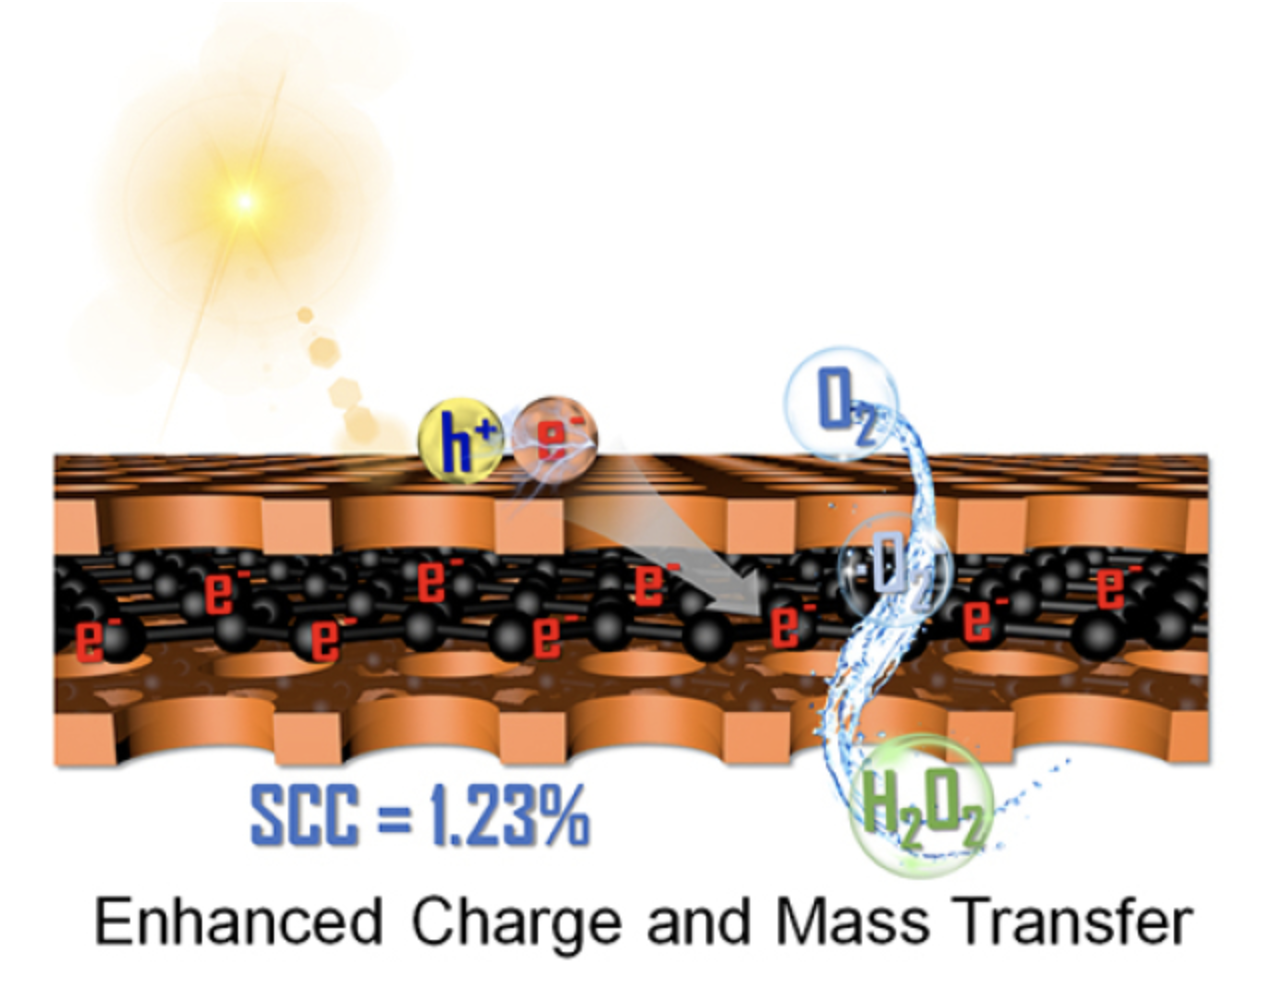 CAS DICP achieves improved photocatalytic production of hydrogen peroxide